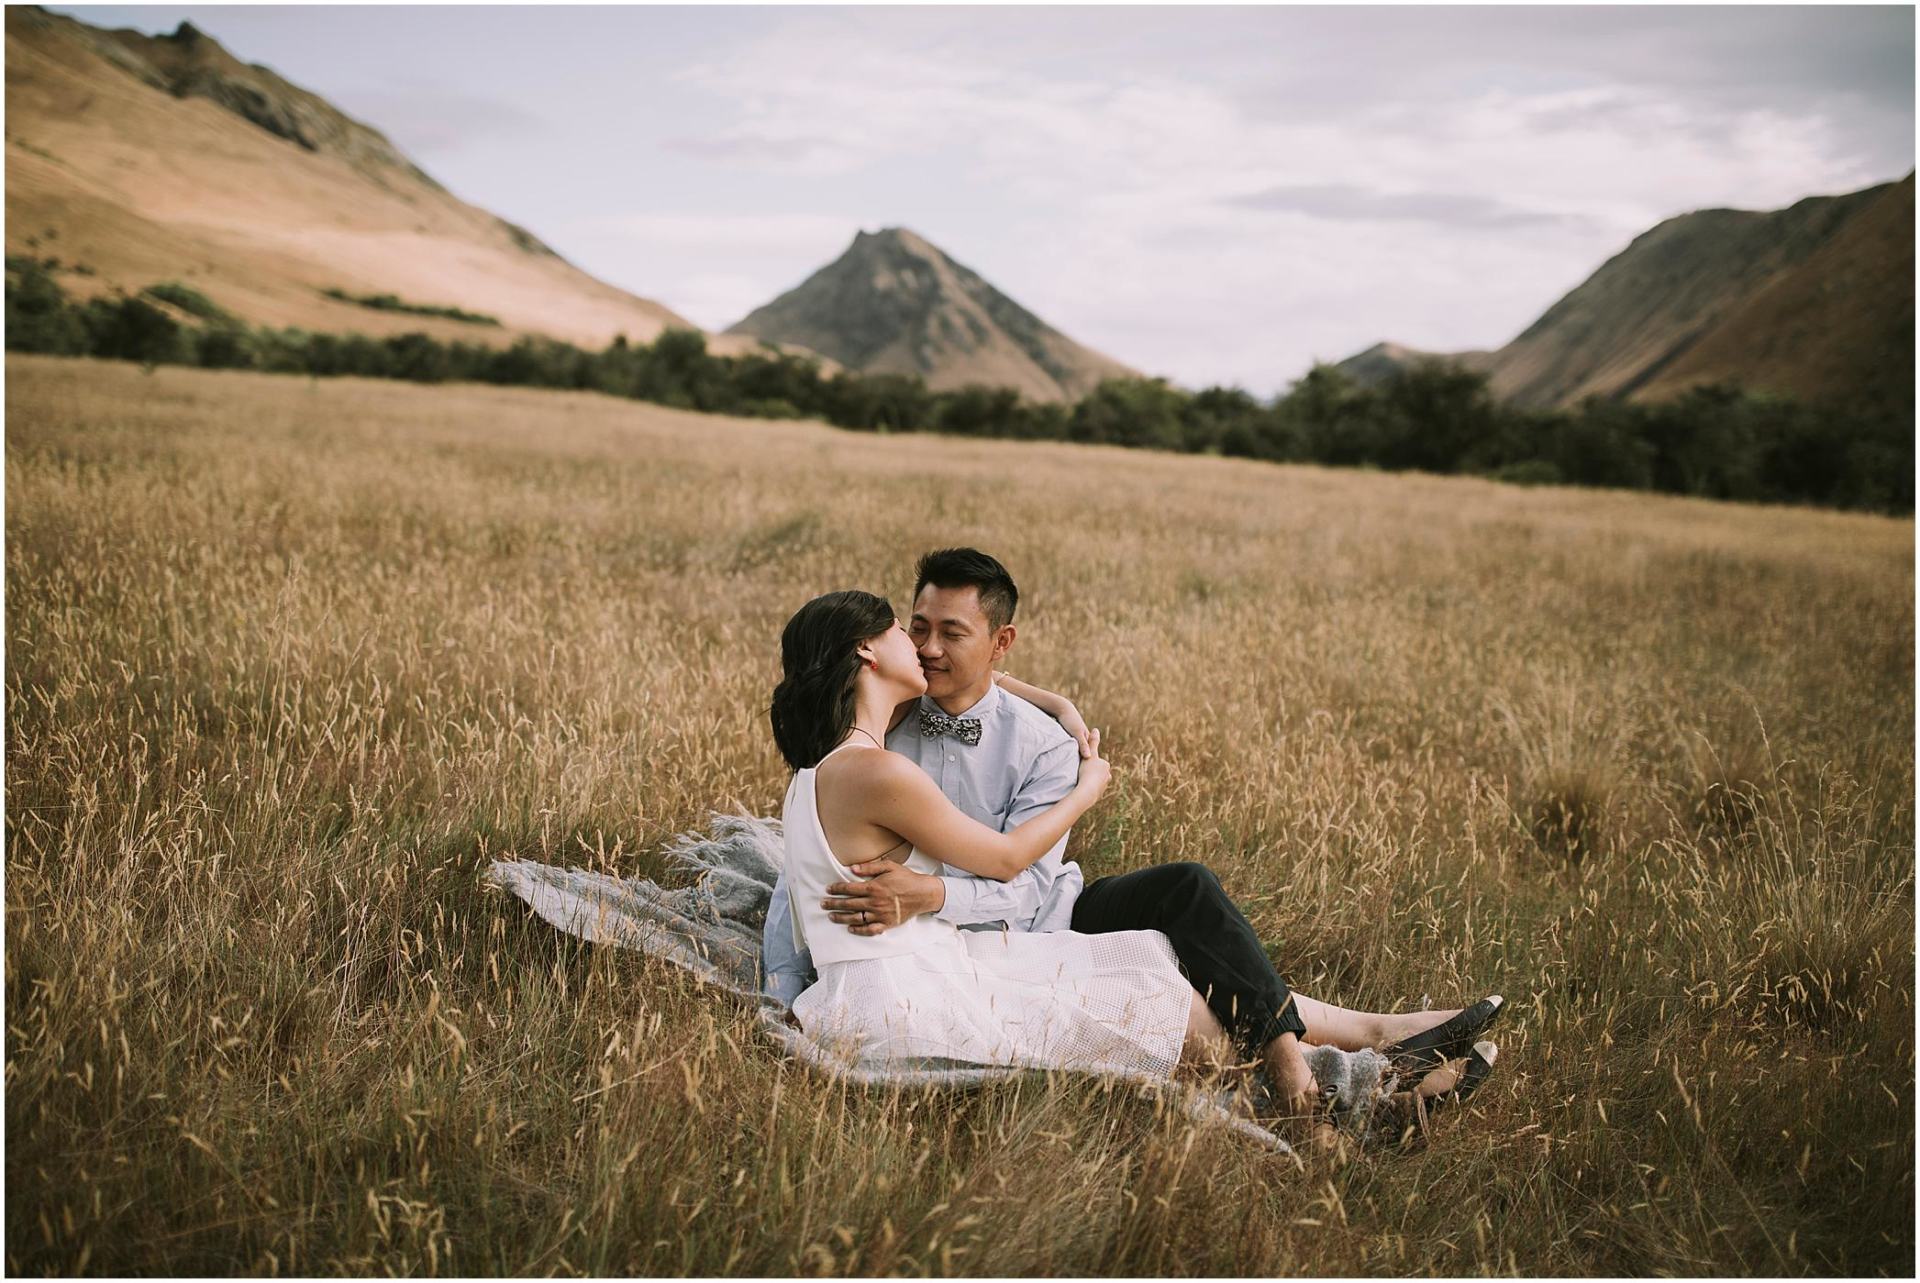 Charlotte Kiri Photography - Engagement Photography with a besotted couple joyfully embracing in the grass with a beautiful mountain landscape behind in Wanaka, New Zealand